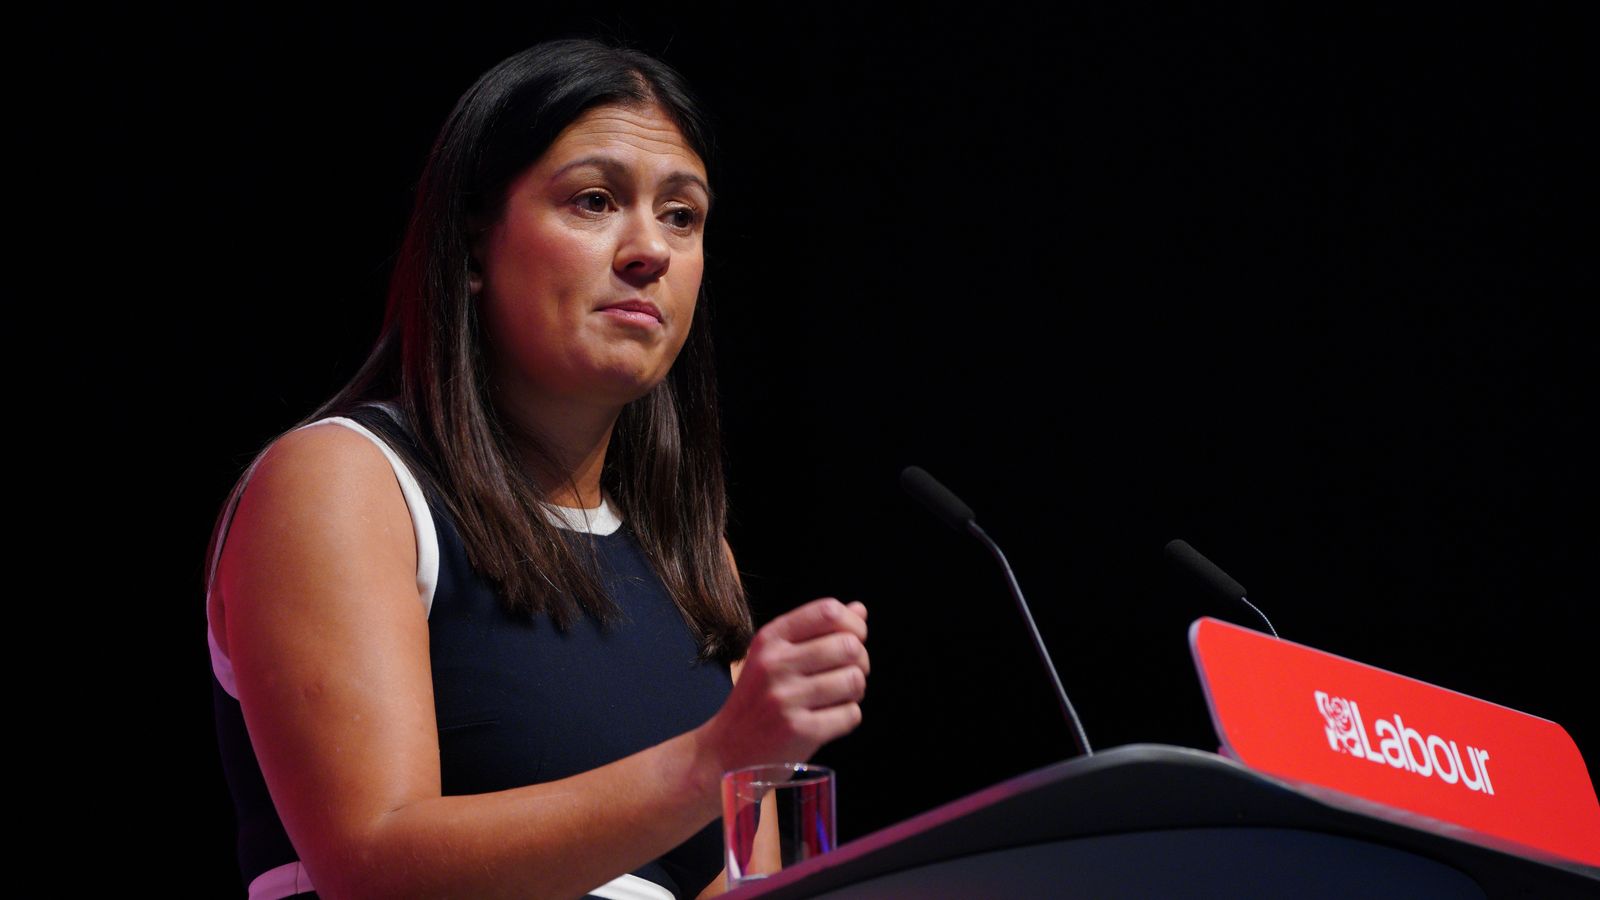 Lisa Nandy rejects rent controls as 'sticking plaster' solution to housing crisis